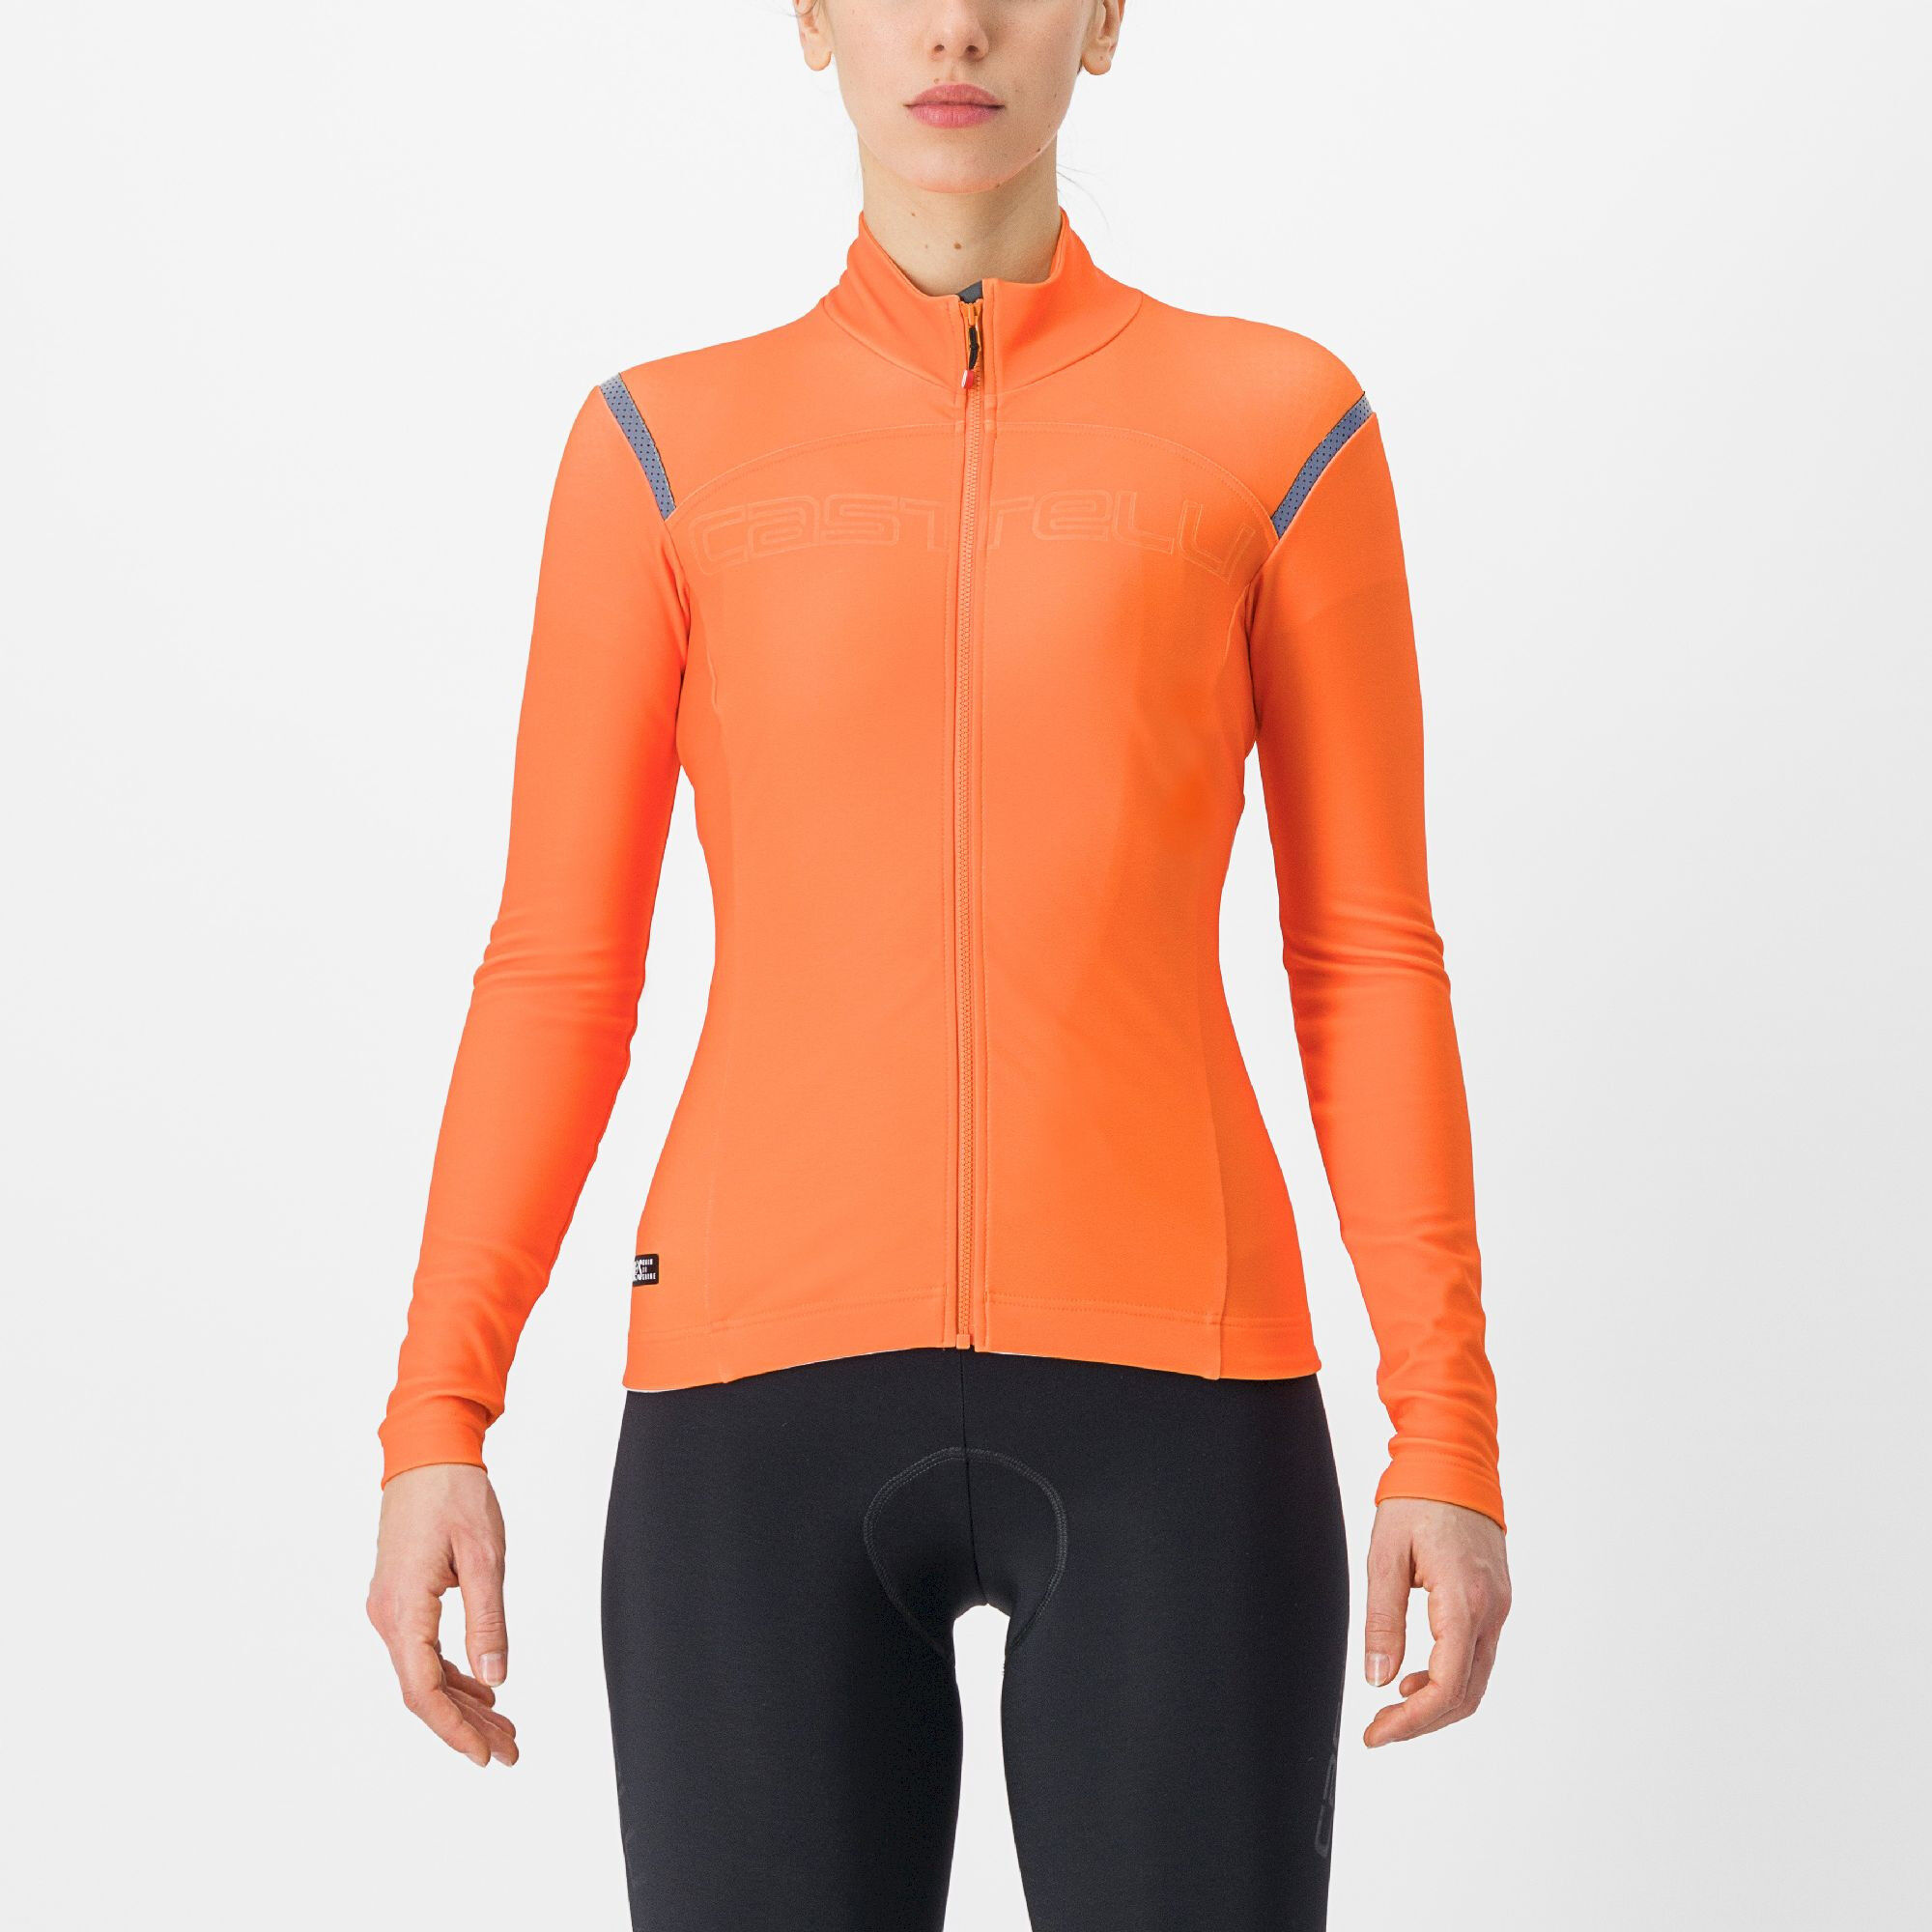 Castelli Tutto Nano RoS Jersey - Cycling jersey - Women's | Hardloop